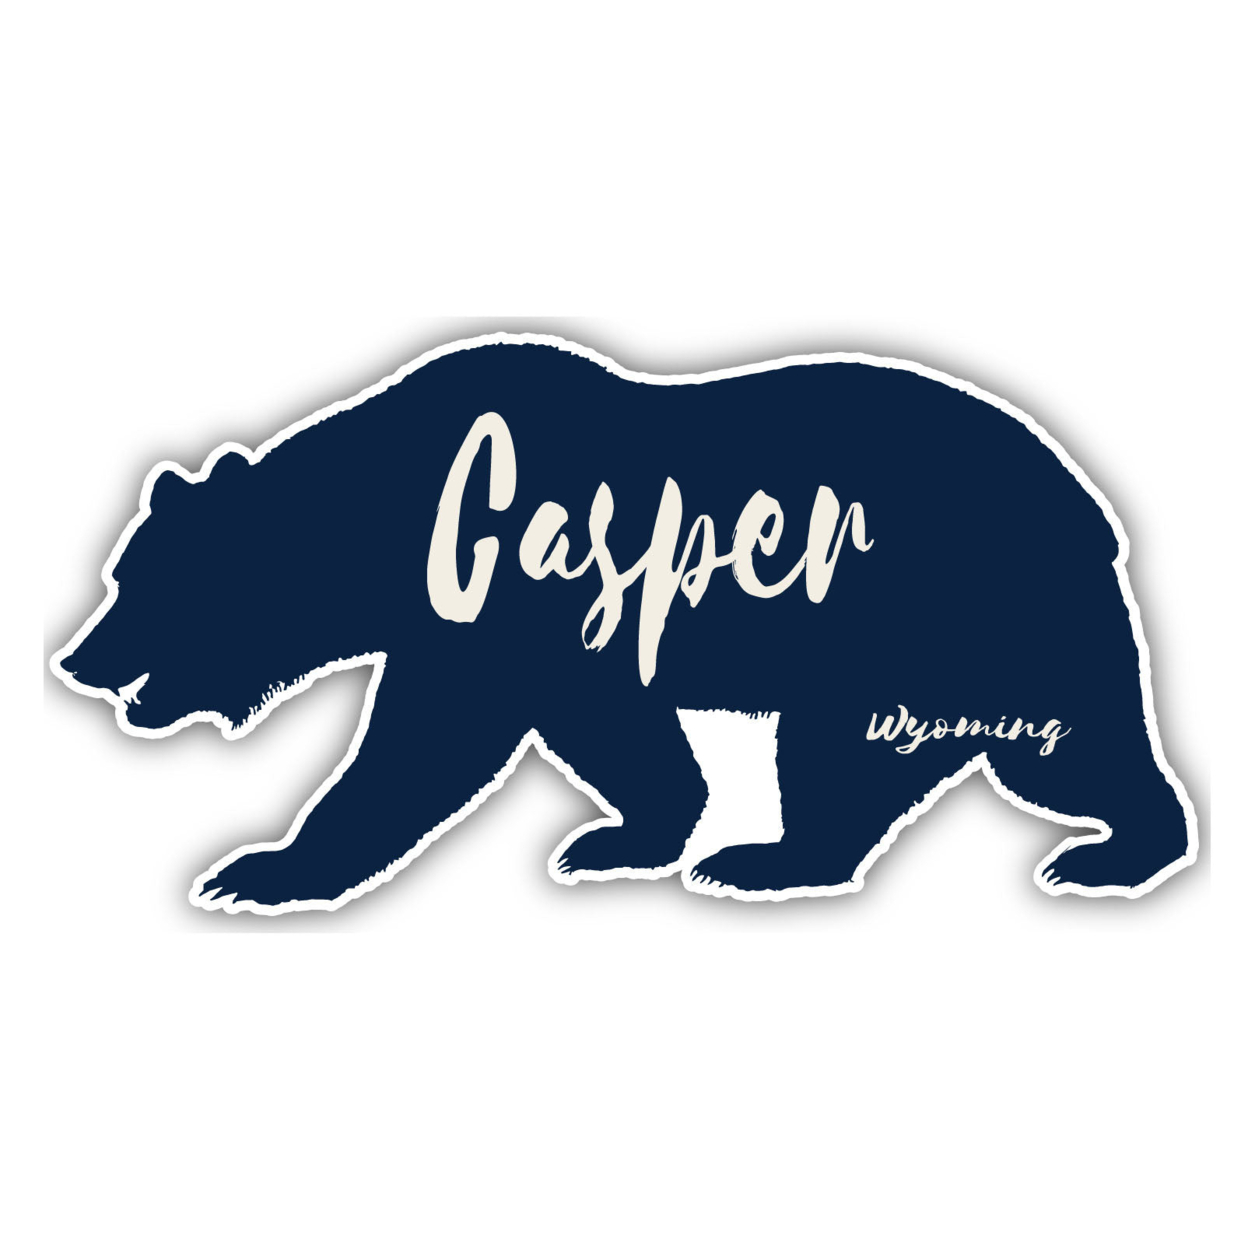 Casper Wyoming Souvenir Decorative Stickers (Choose Theme And Size) - 4-Pack, 10-Inch, Camp Life